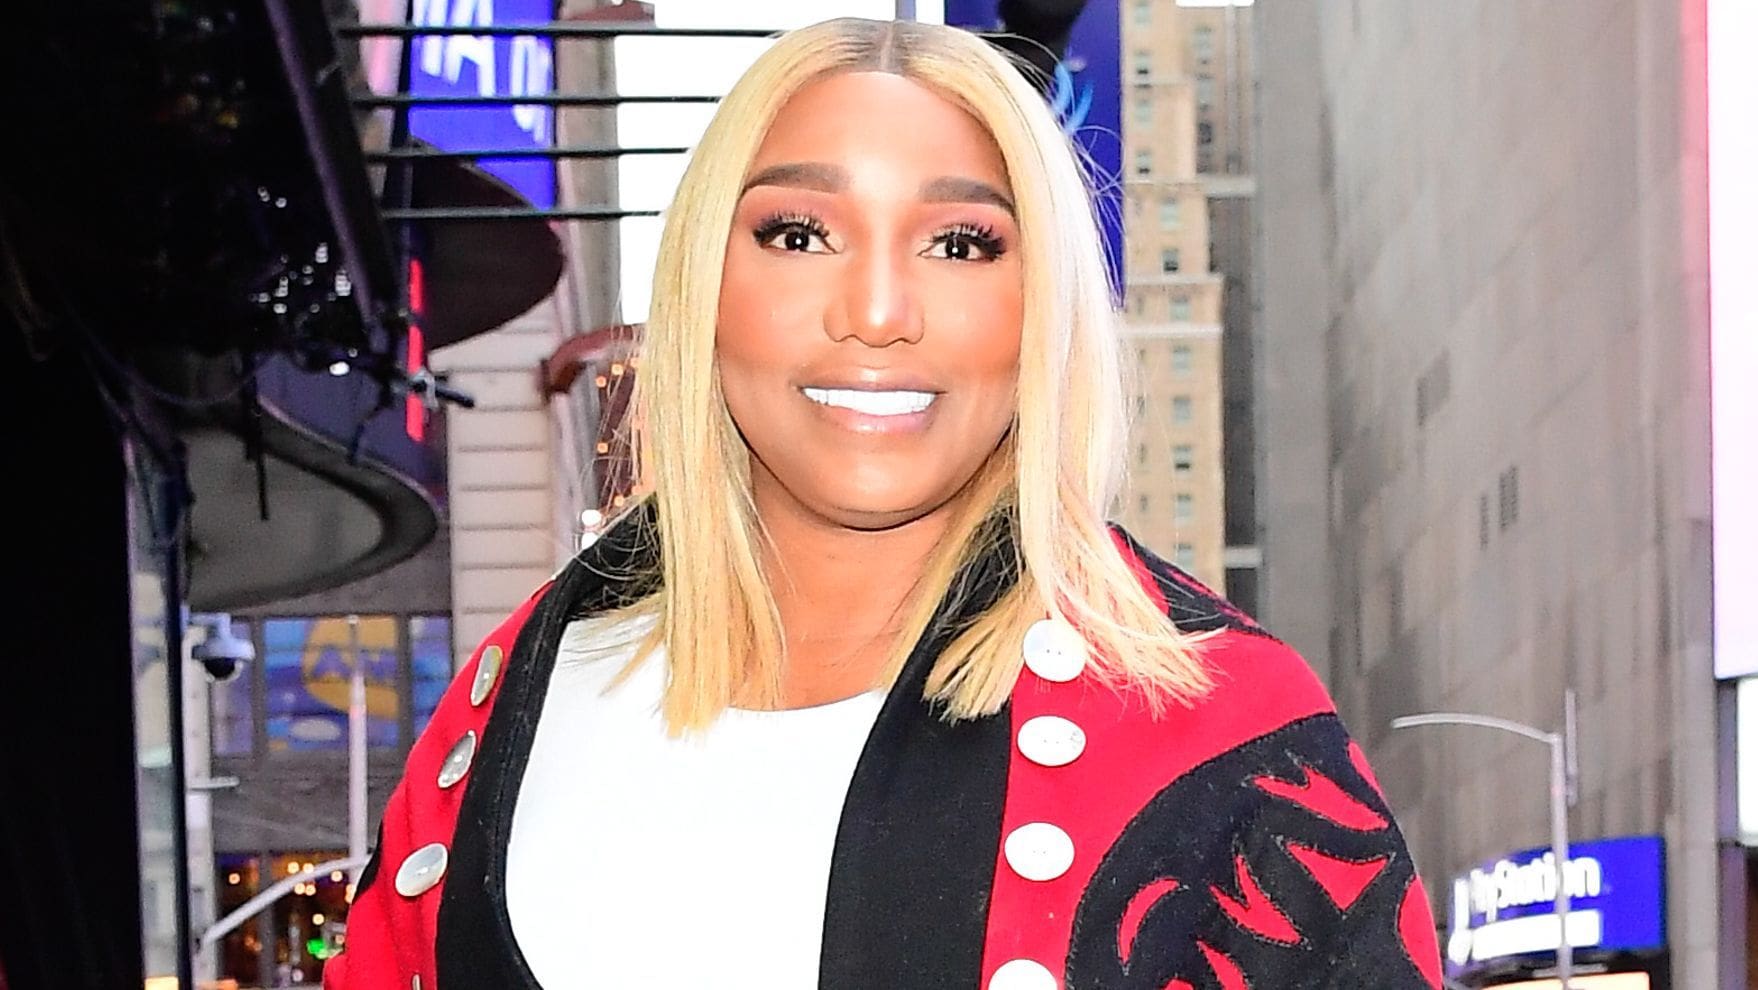 NeNe Leakes Shows Off Her Dark Roots - Check Out Her Photo